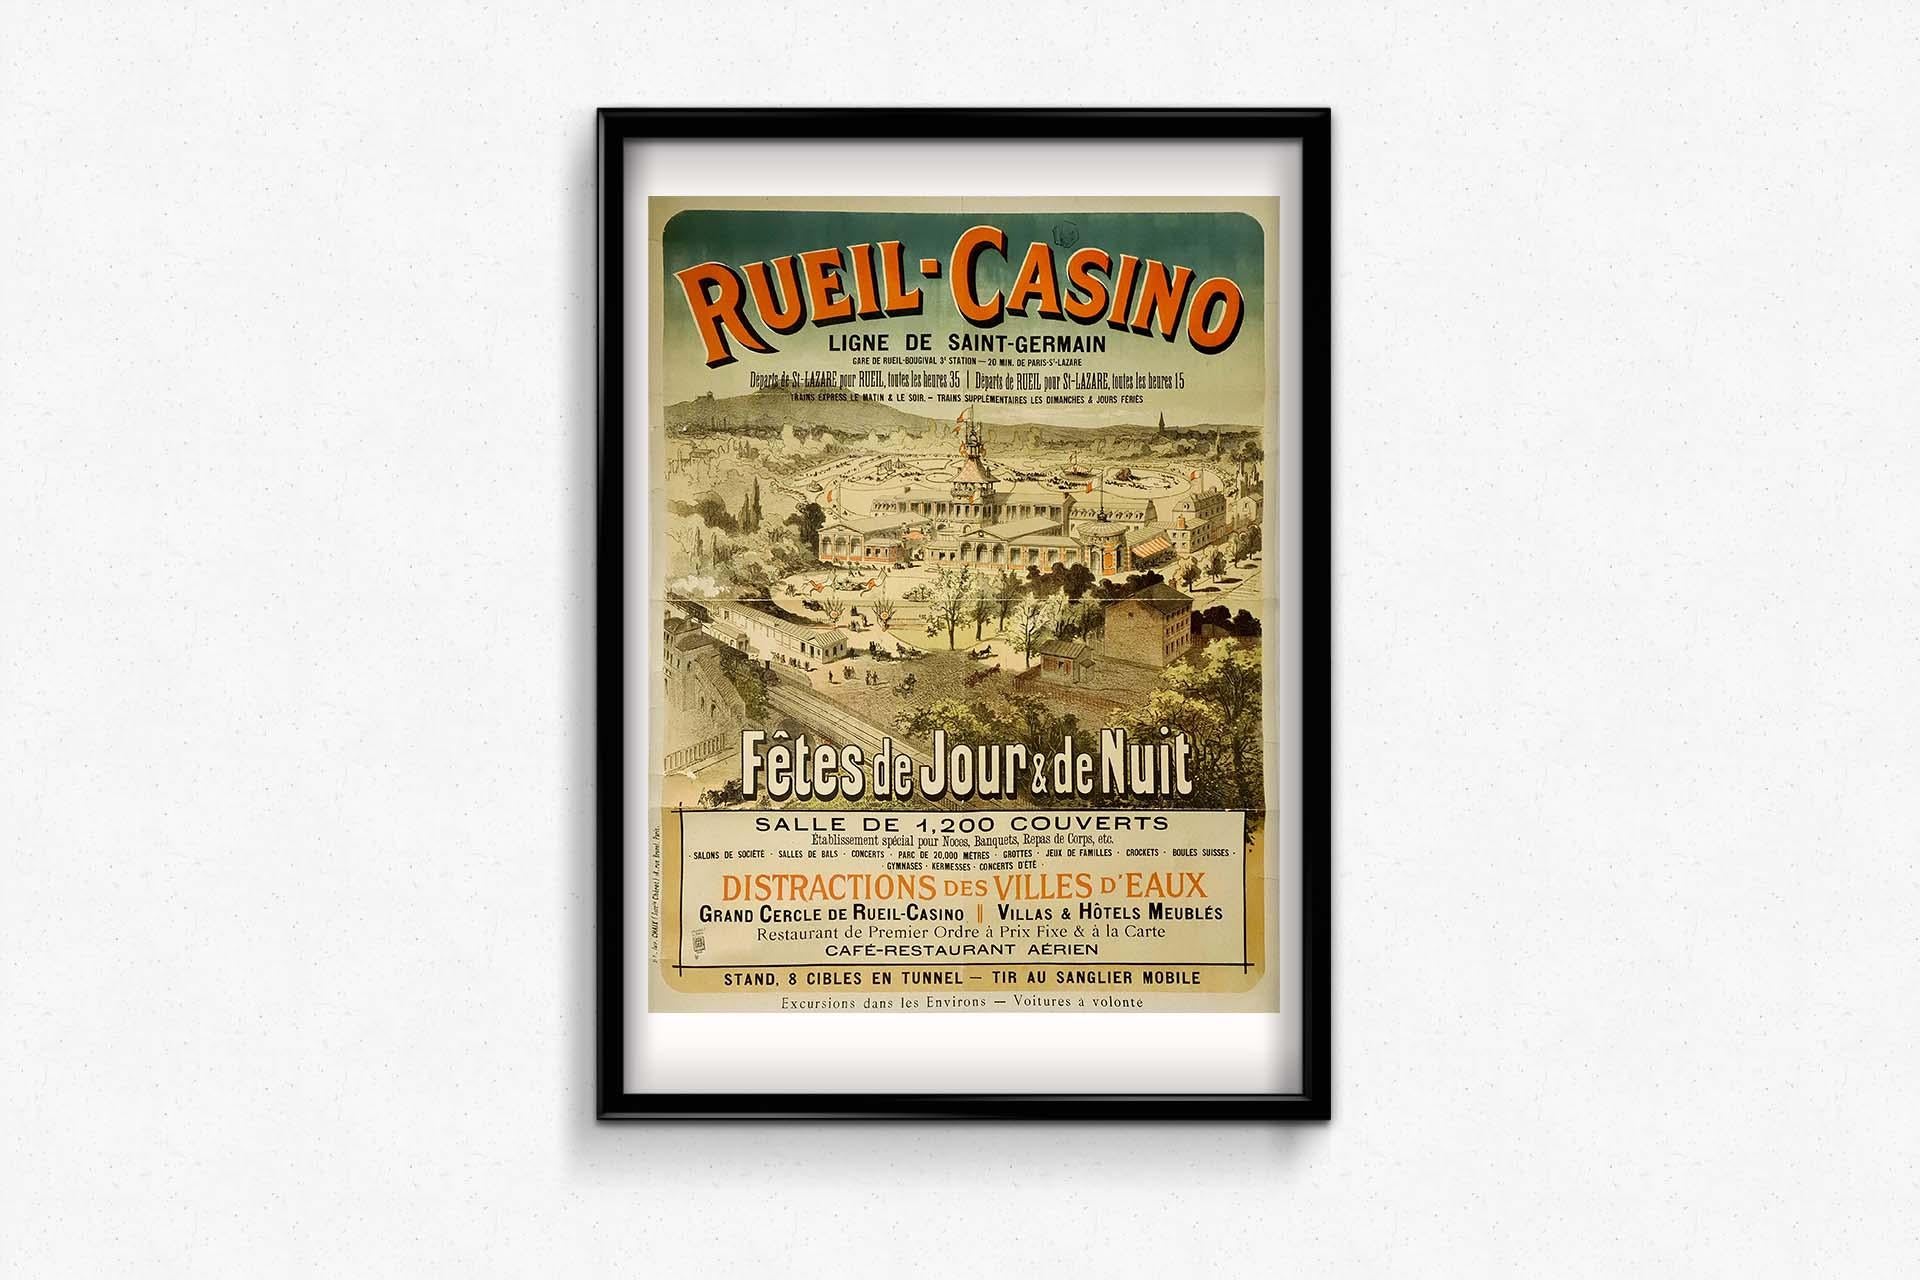 The 1883 original travel poster promoting the Rueil Casino and its day and night festivities captures the essence of leisure and entertainment along the Saint Germain Line. This poster, a testament to the Belle Ã‰poque era's allure, invites